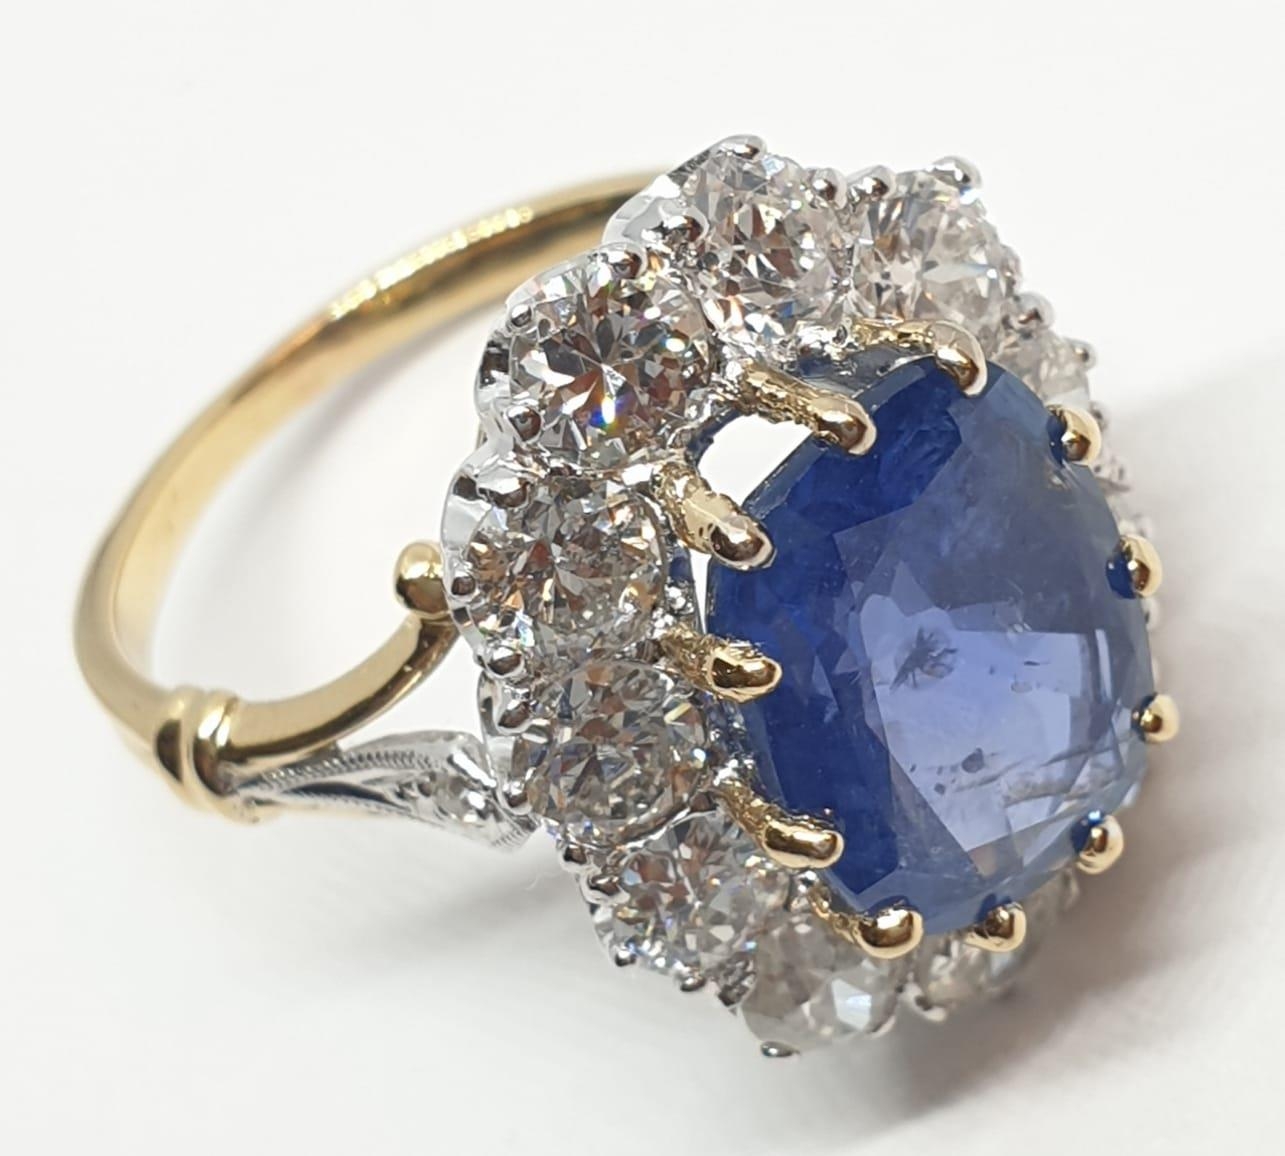 5.75ct sapphire ring set in white and yellow gold with over 3.5ct diamonds surrounding, weight 6. - Image 5 of 12